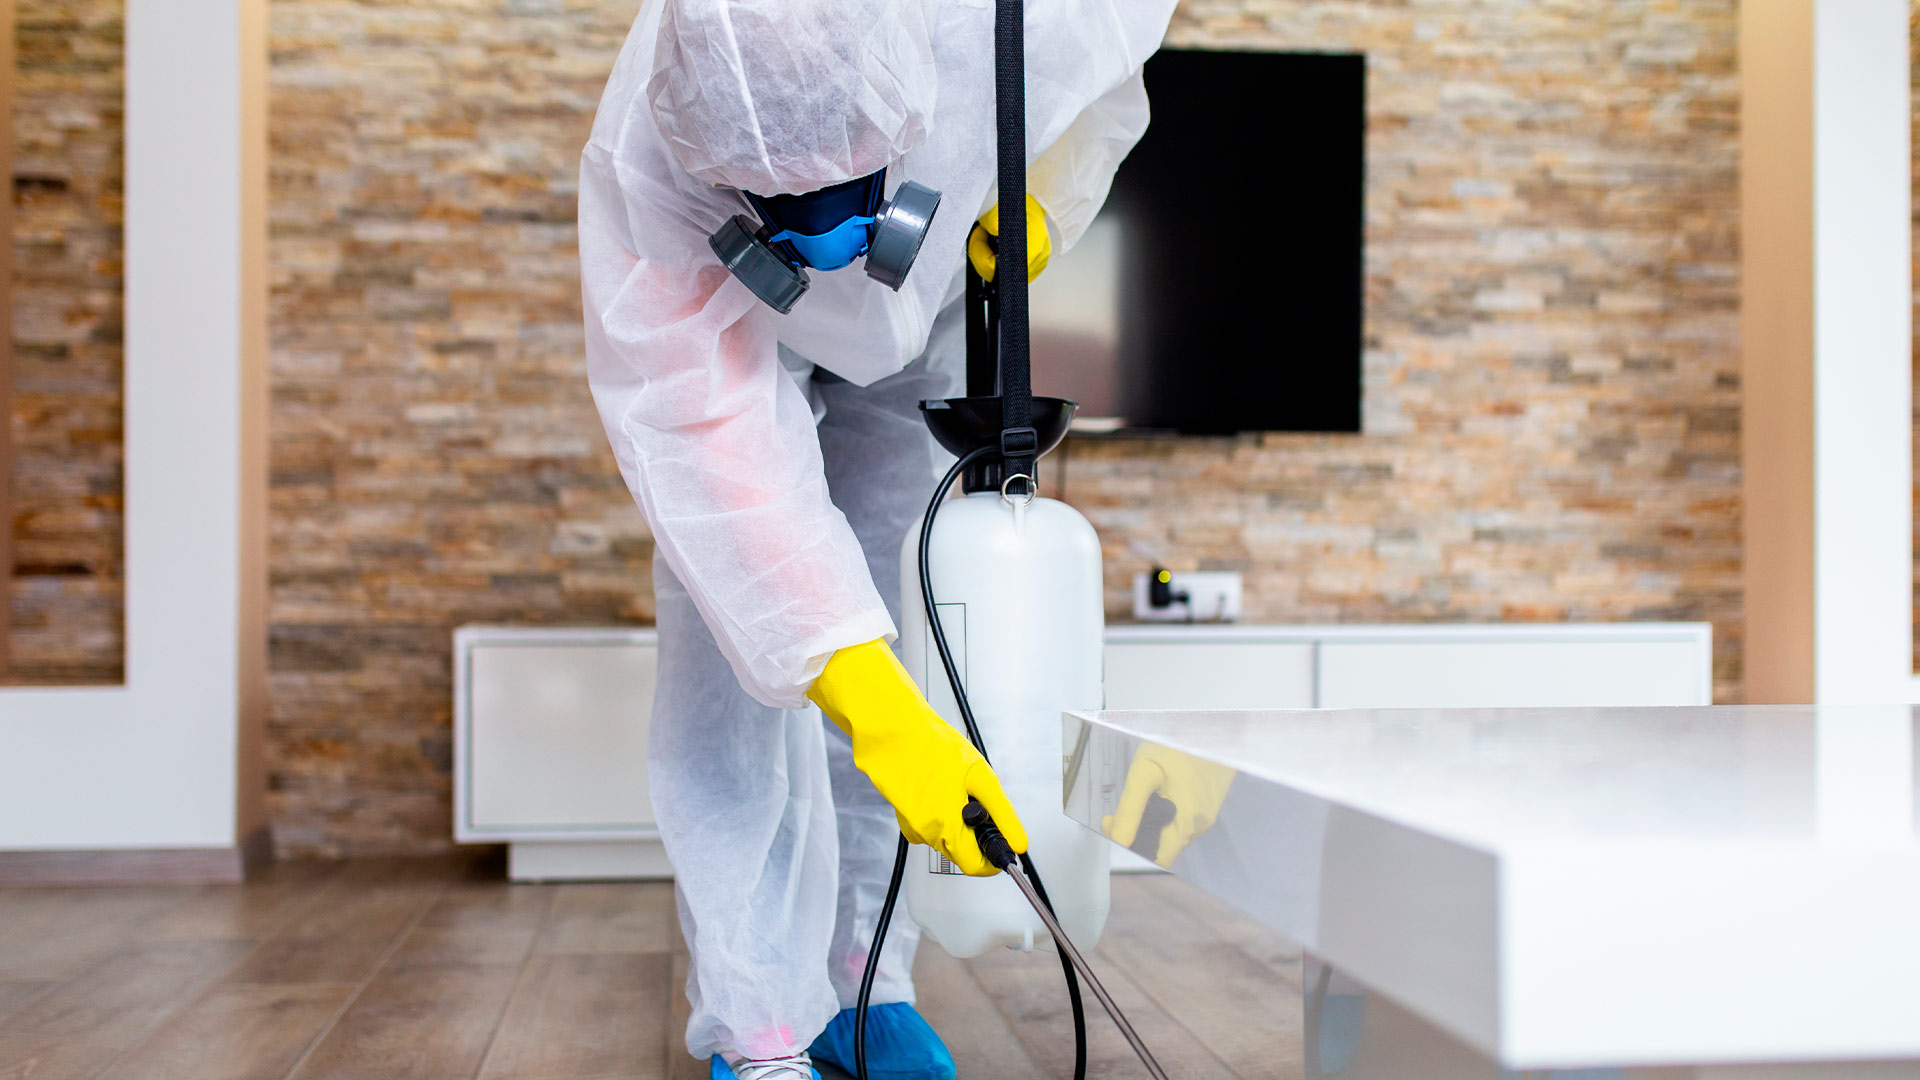 Safe Pest Removal Non-Toxic Options for Homeowners